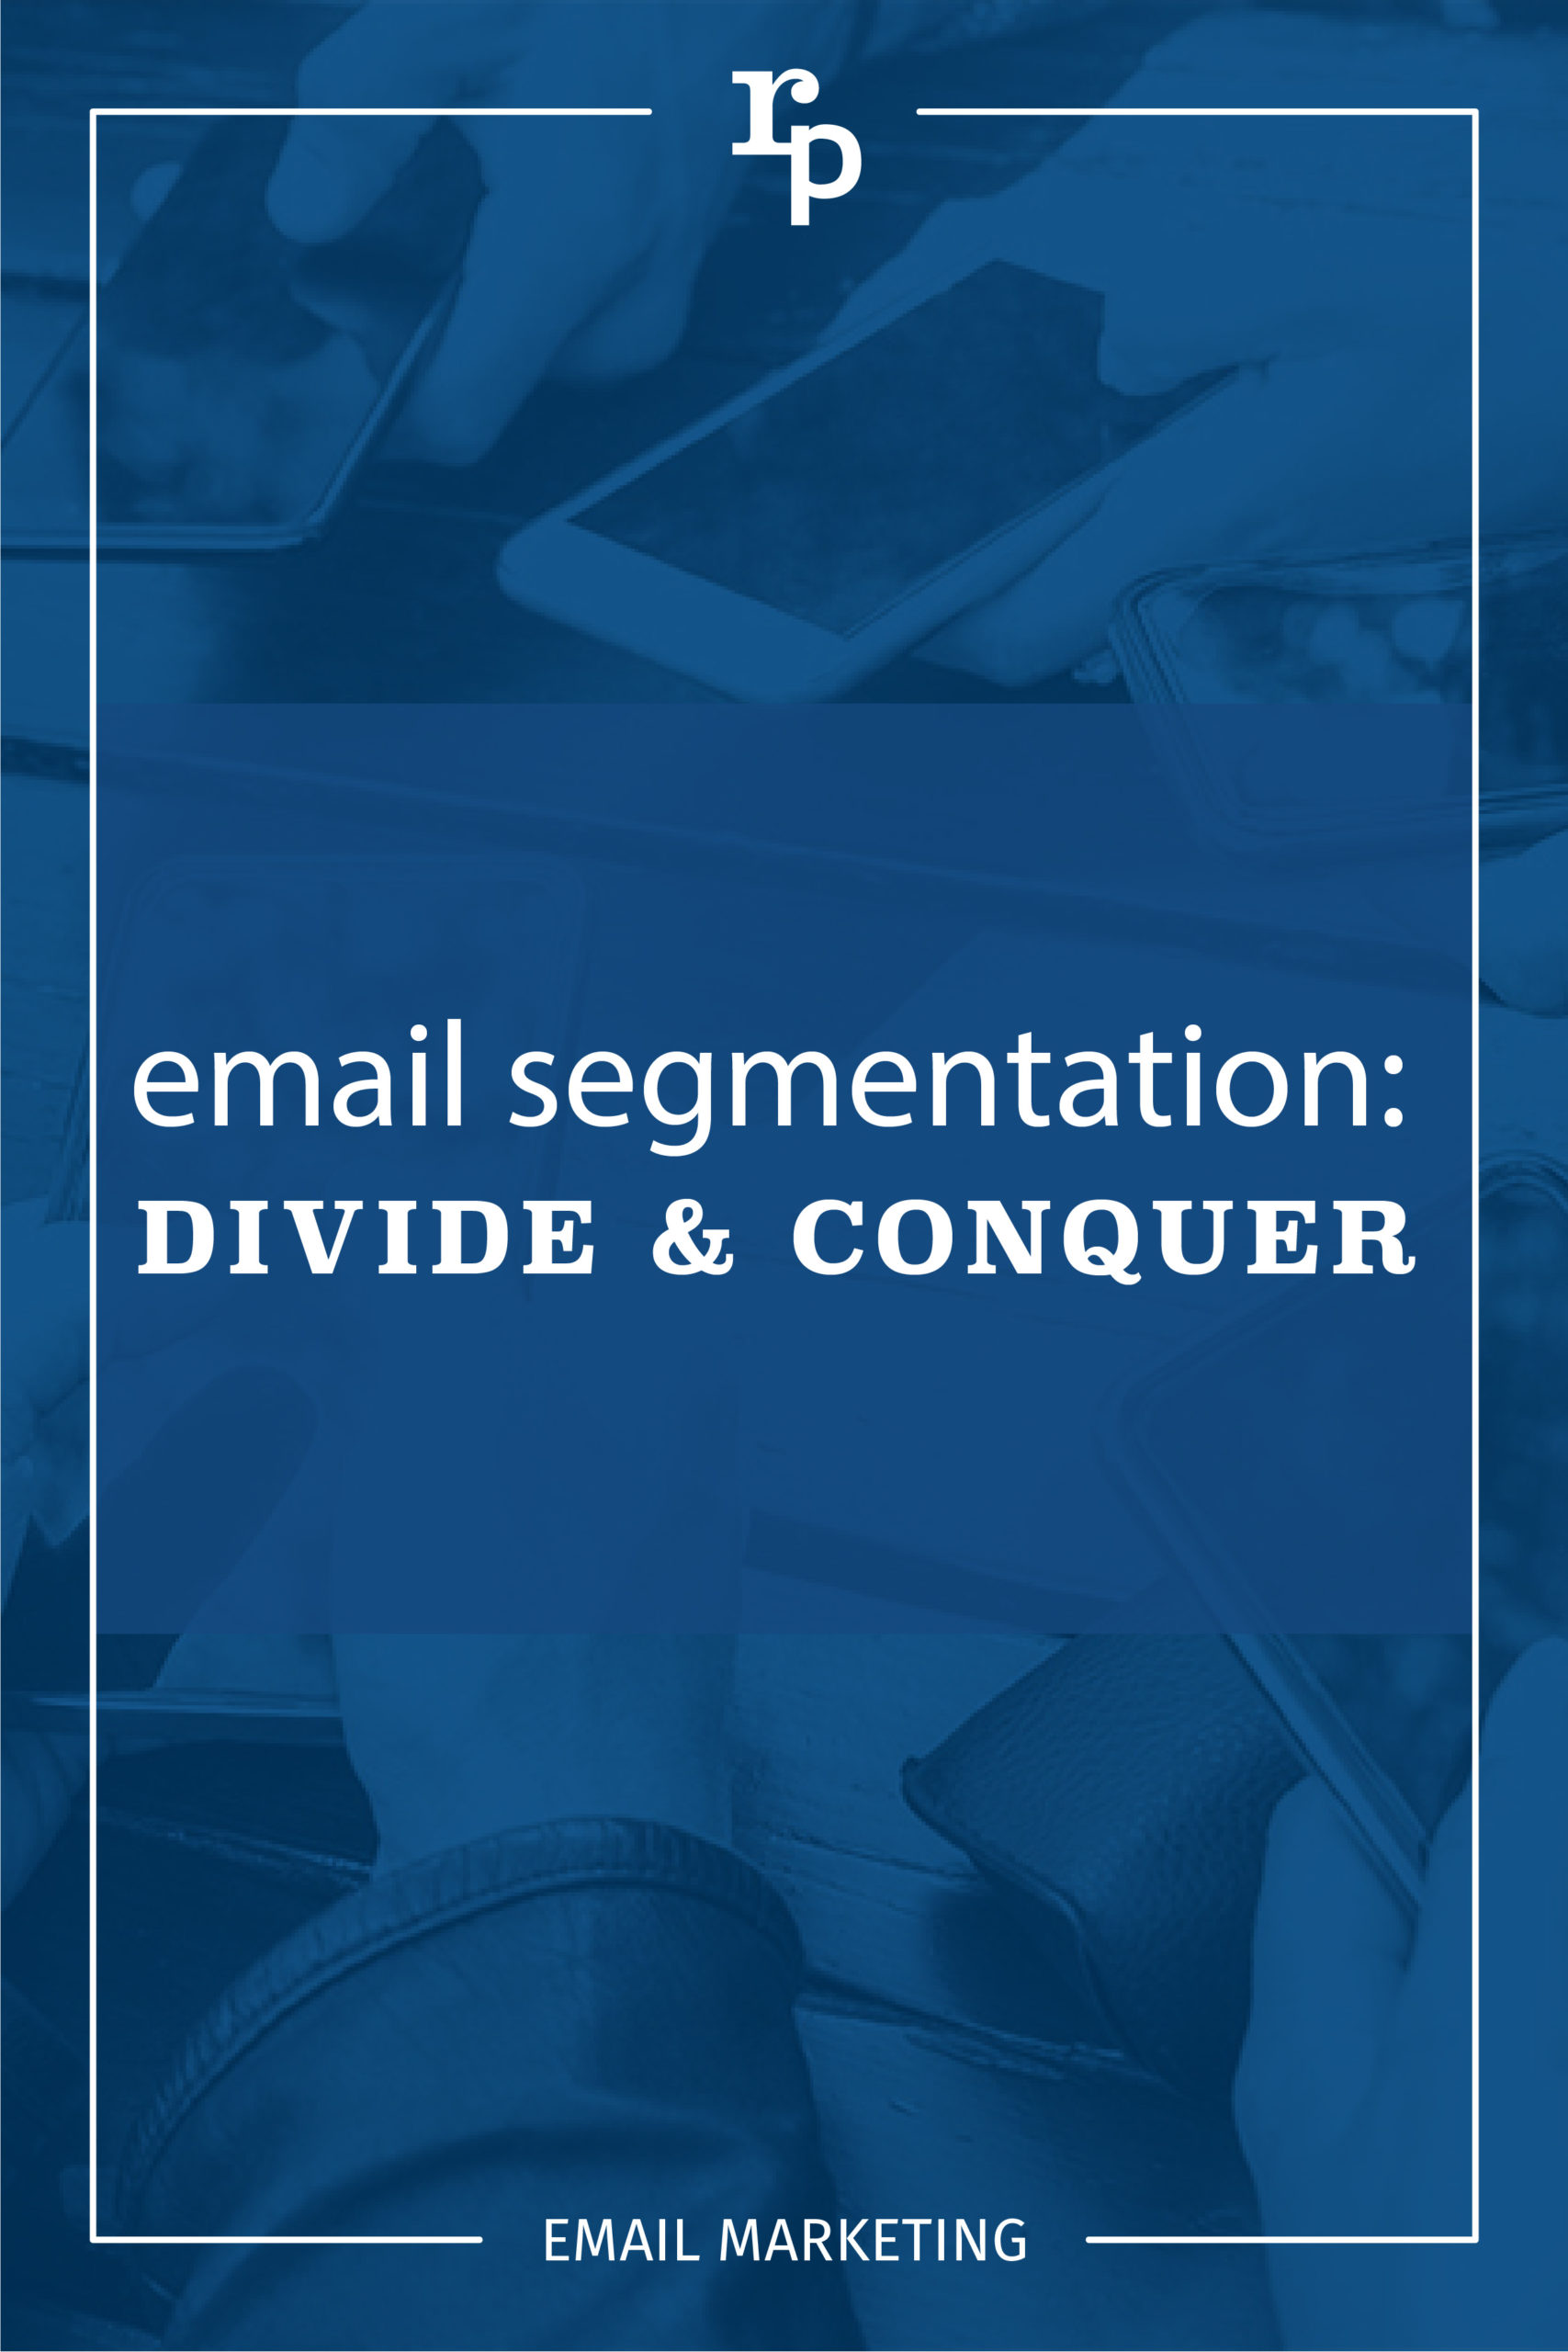 email segmentation social1 pin blue copy scaled